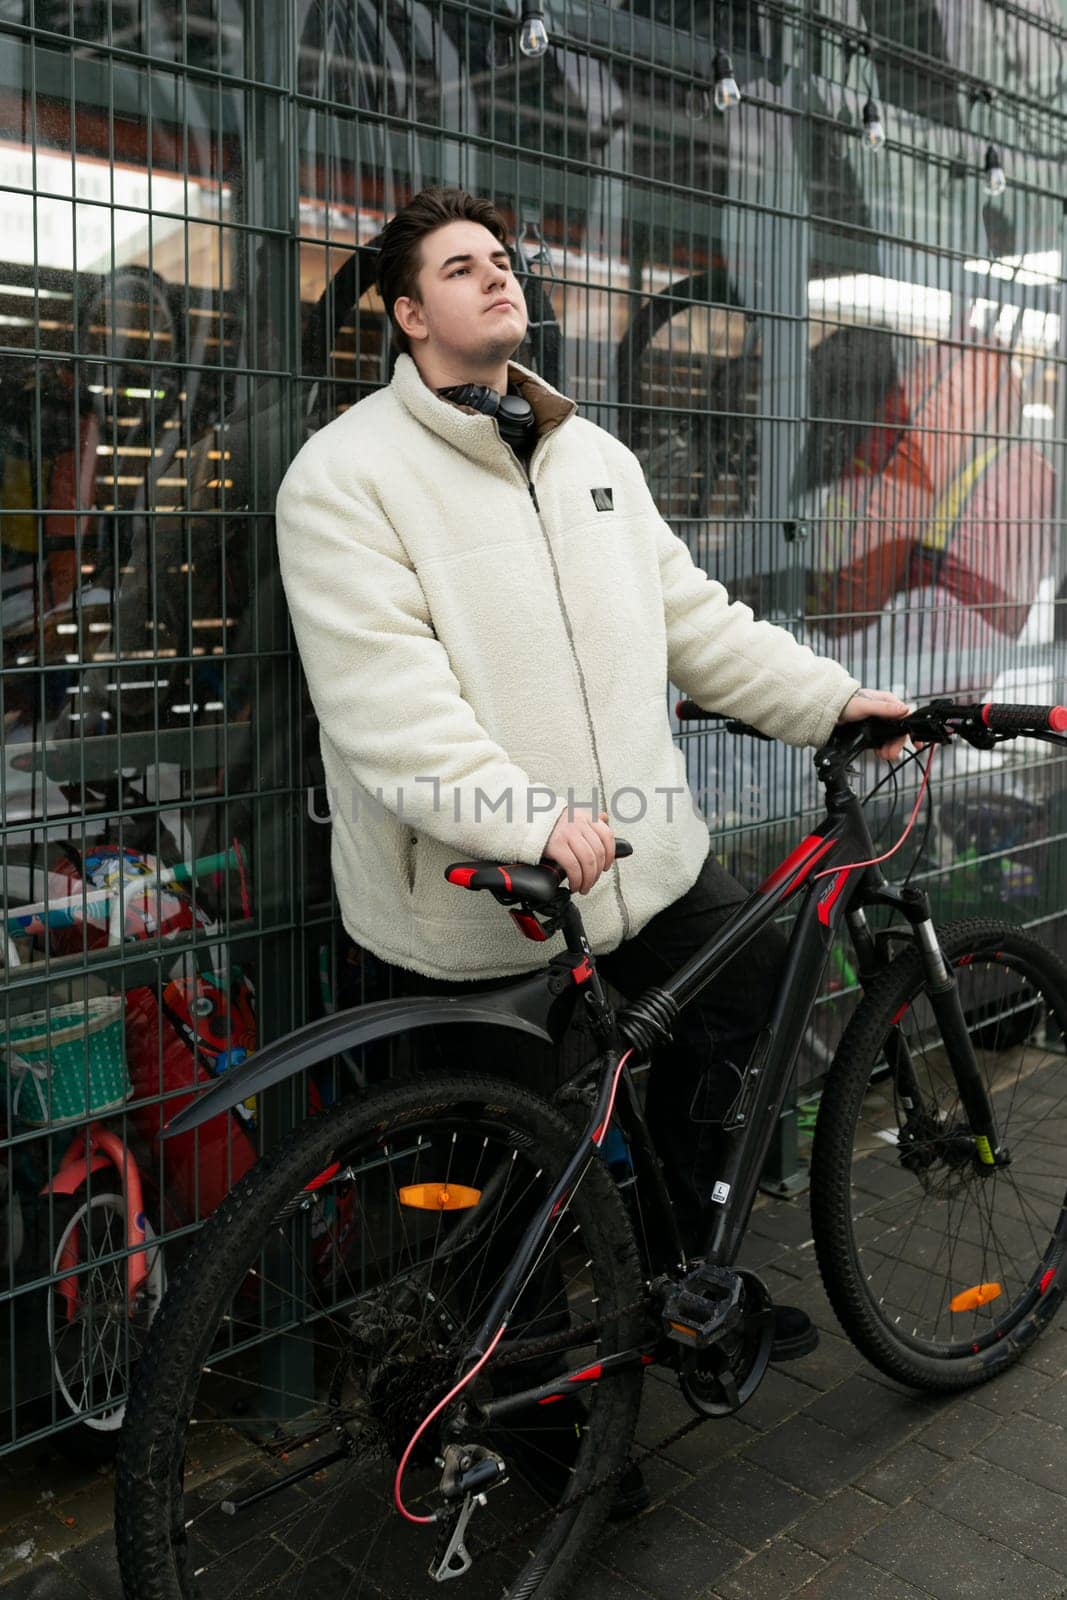 Sports concept, young man spends weekend riding a bike.